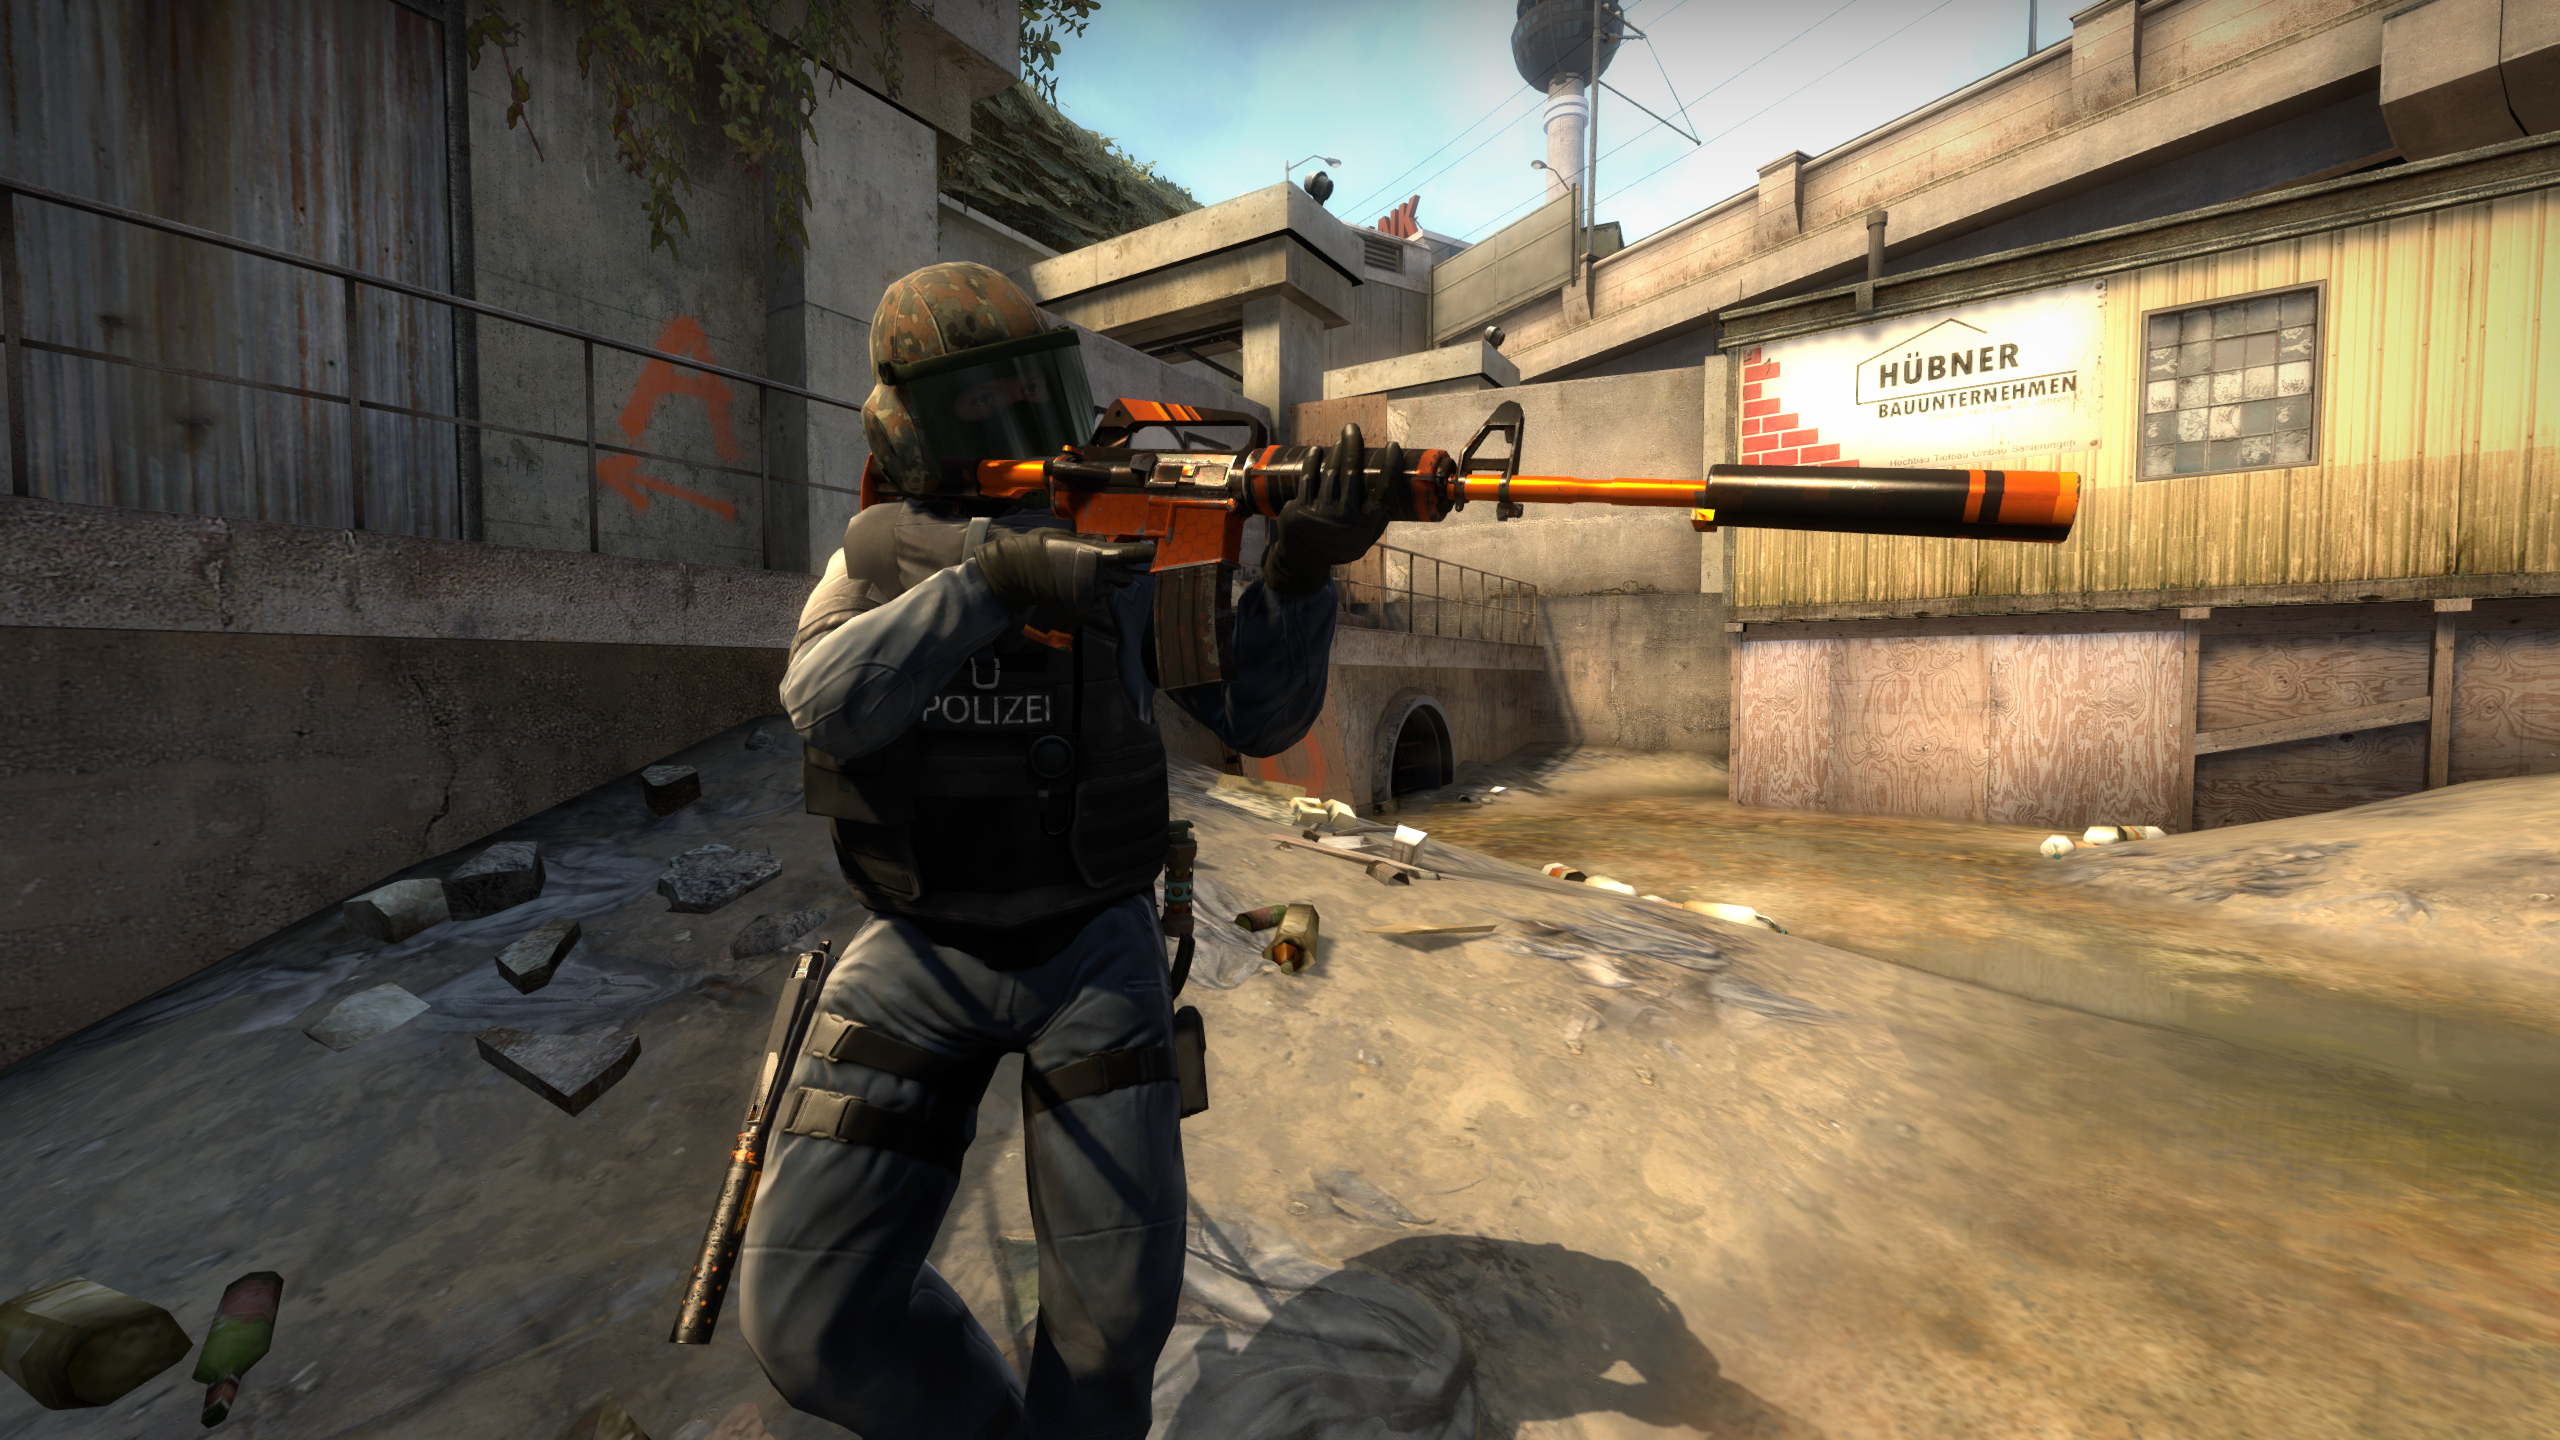 Valve issues cease and desist orders to more than 20 CS:GO gambling sites | PC Gamer